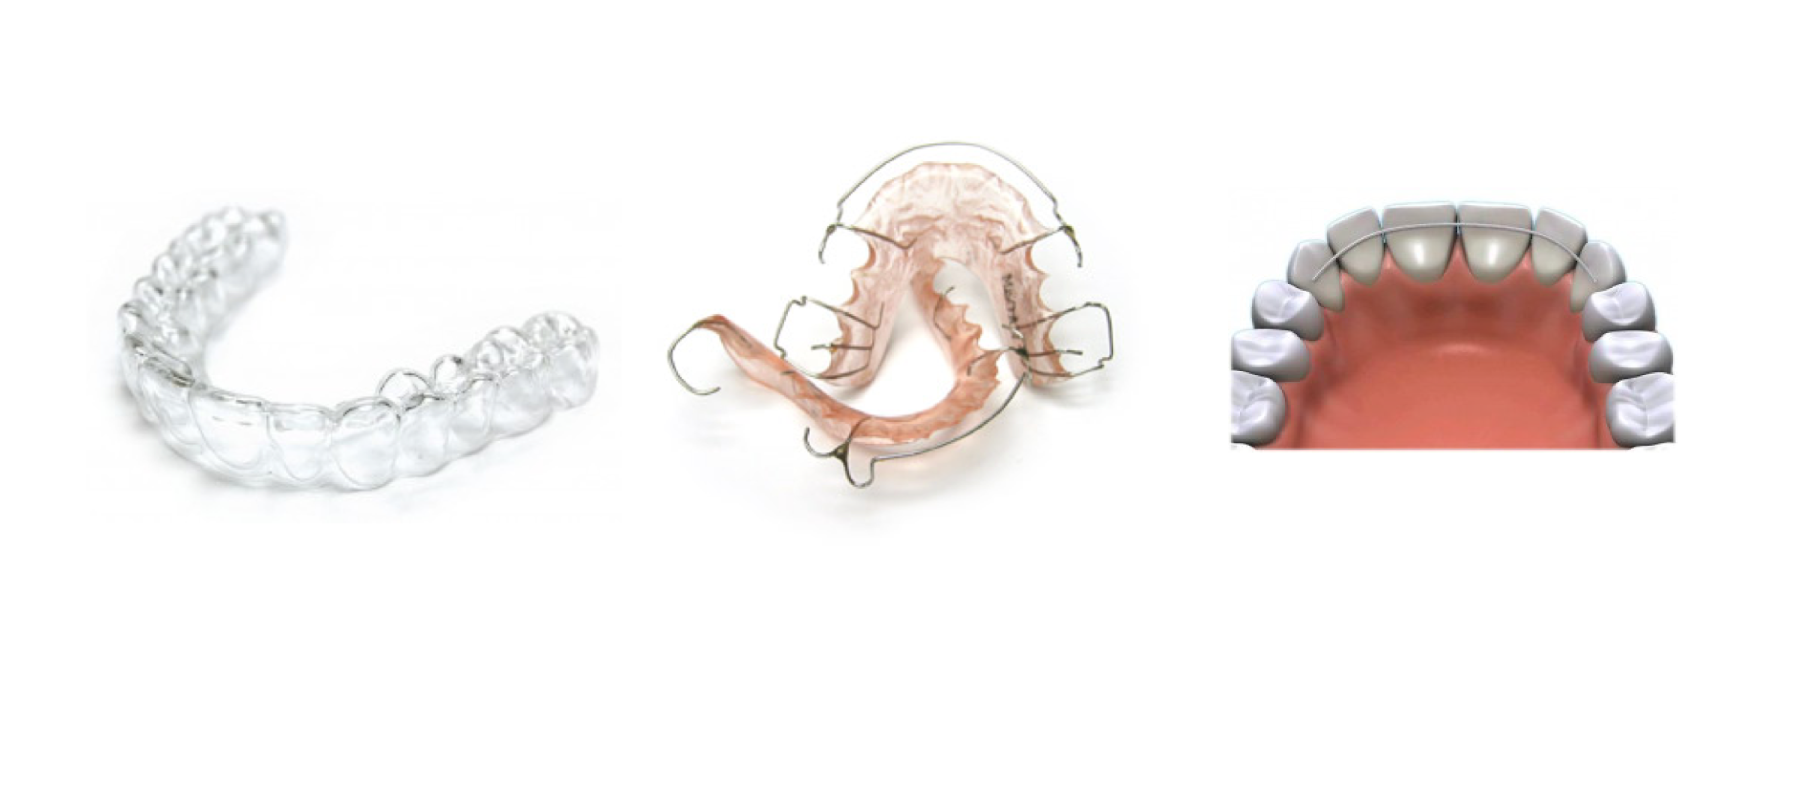 examples of orthodontic treatments